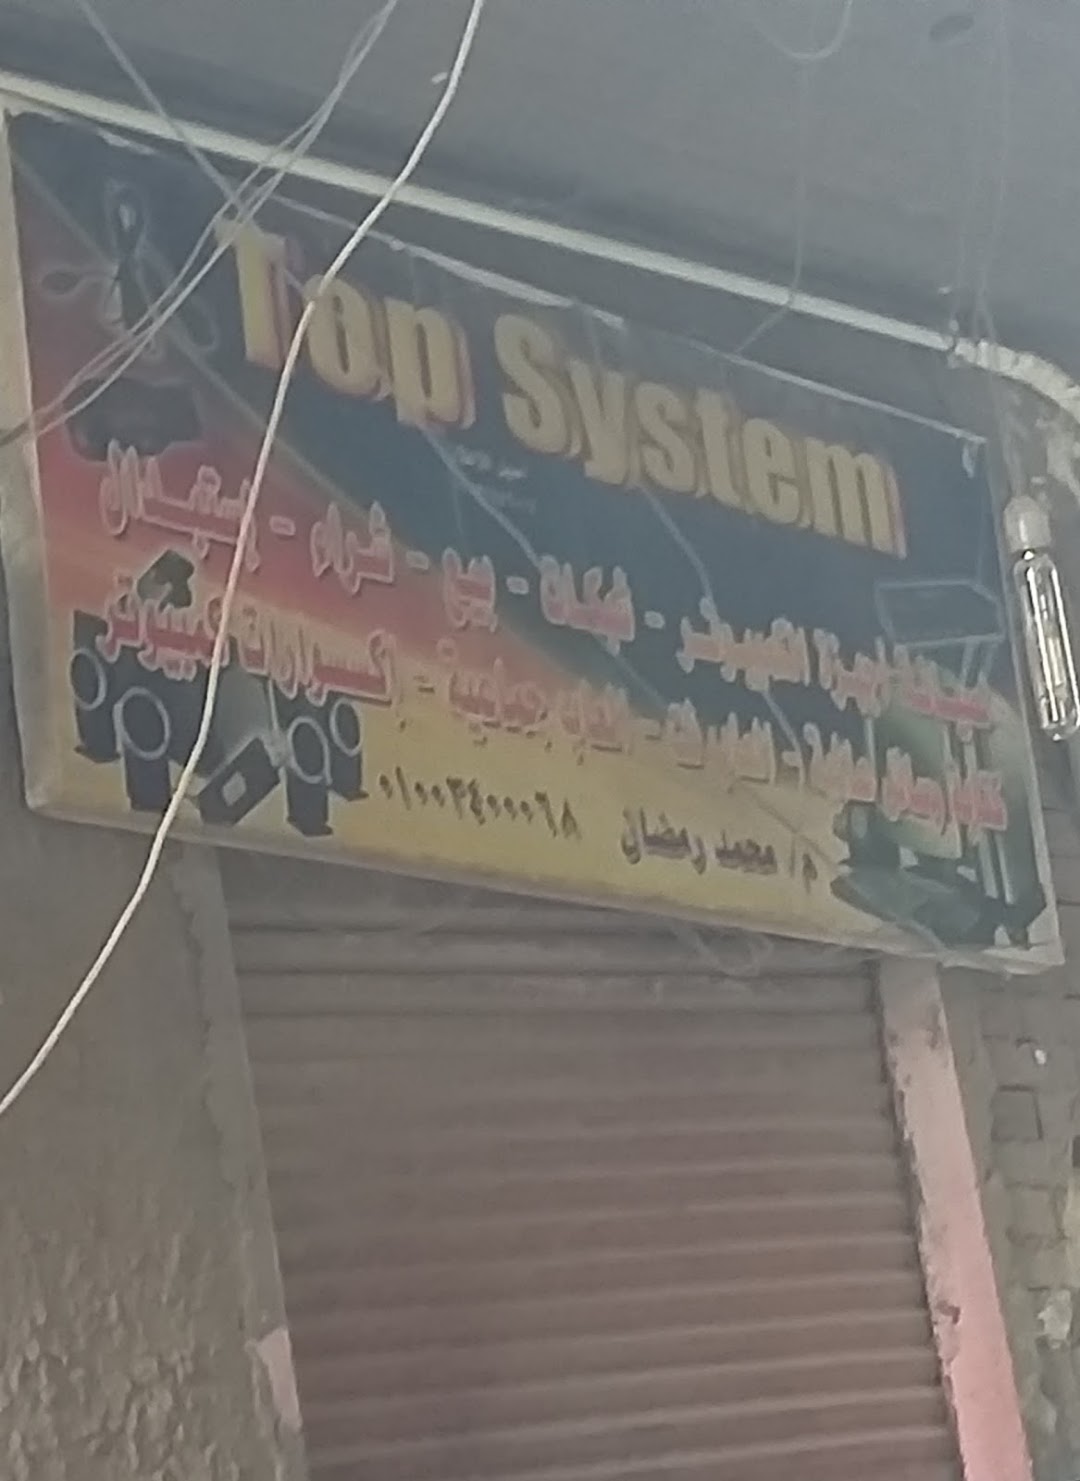 Top System